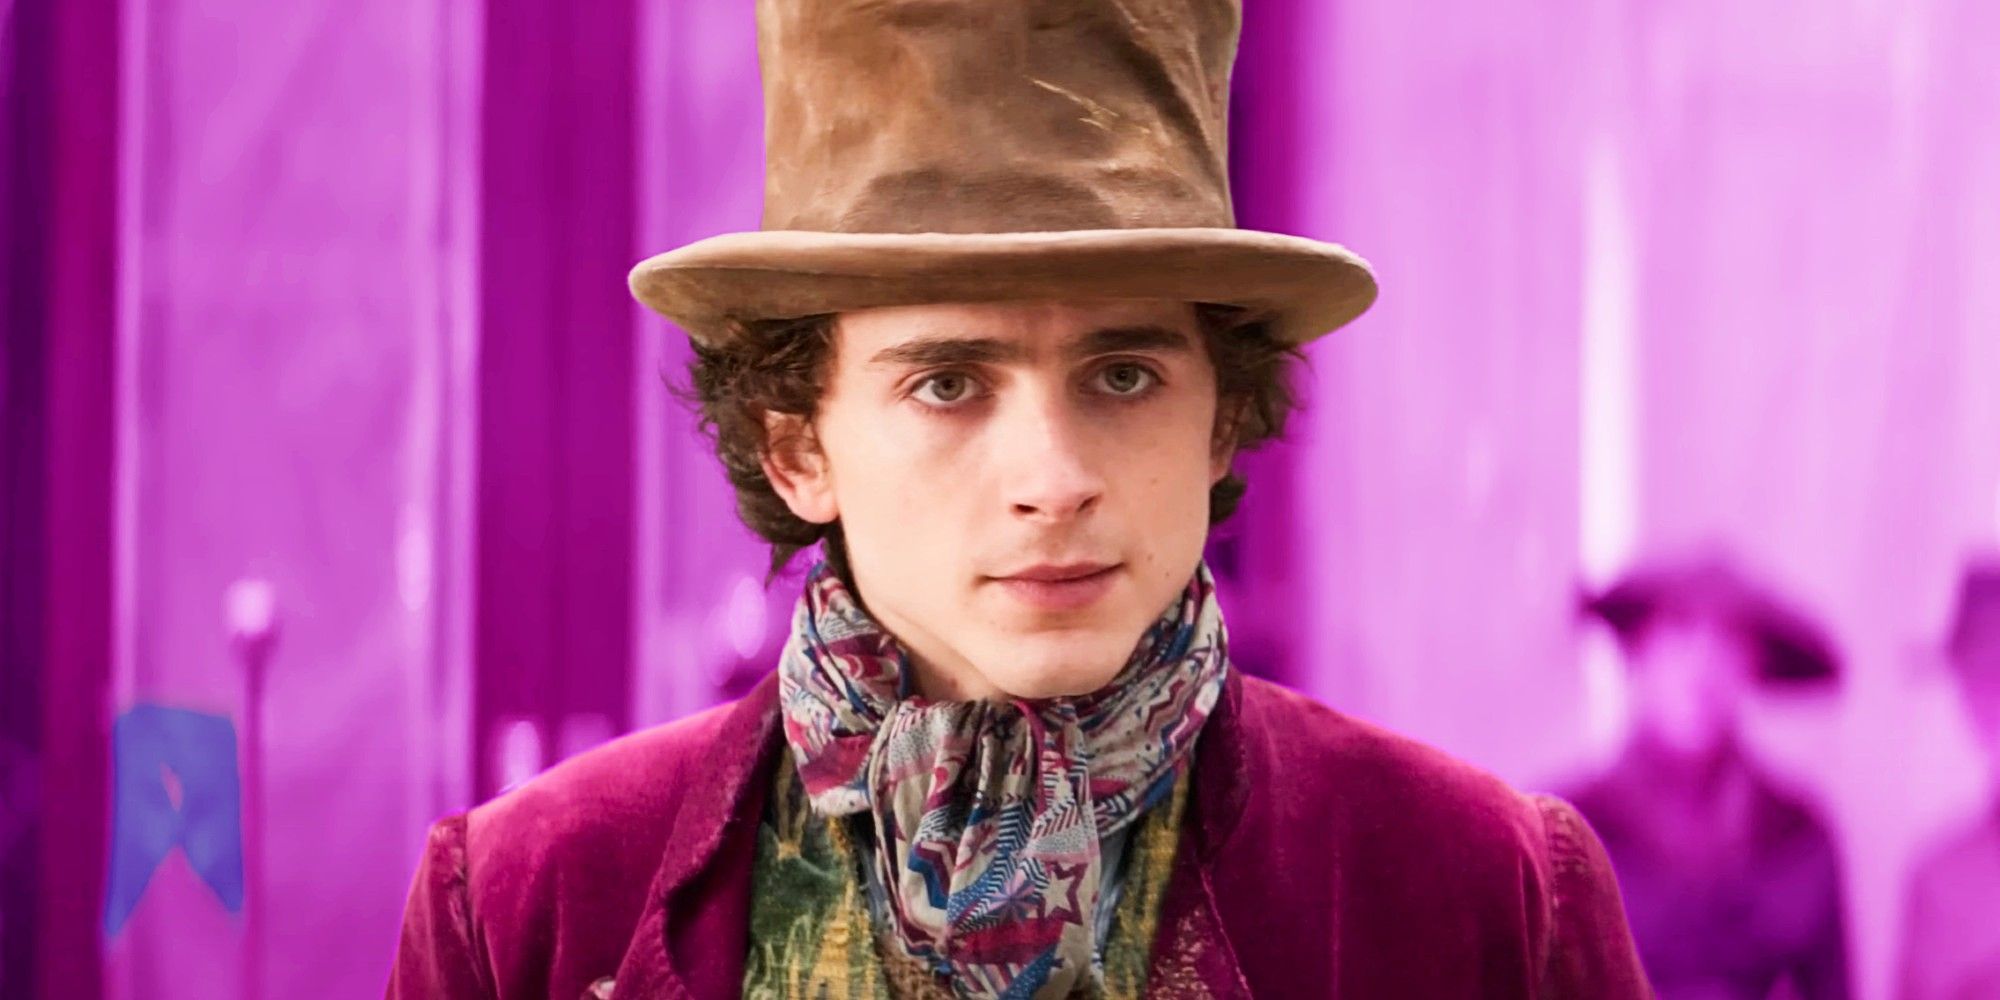 Timothée Chalamet as Willy Wonka in the Wonka movie with a pink background